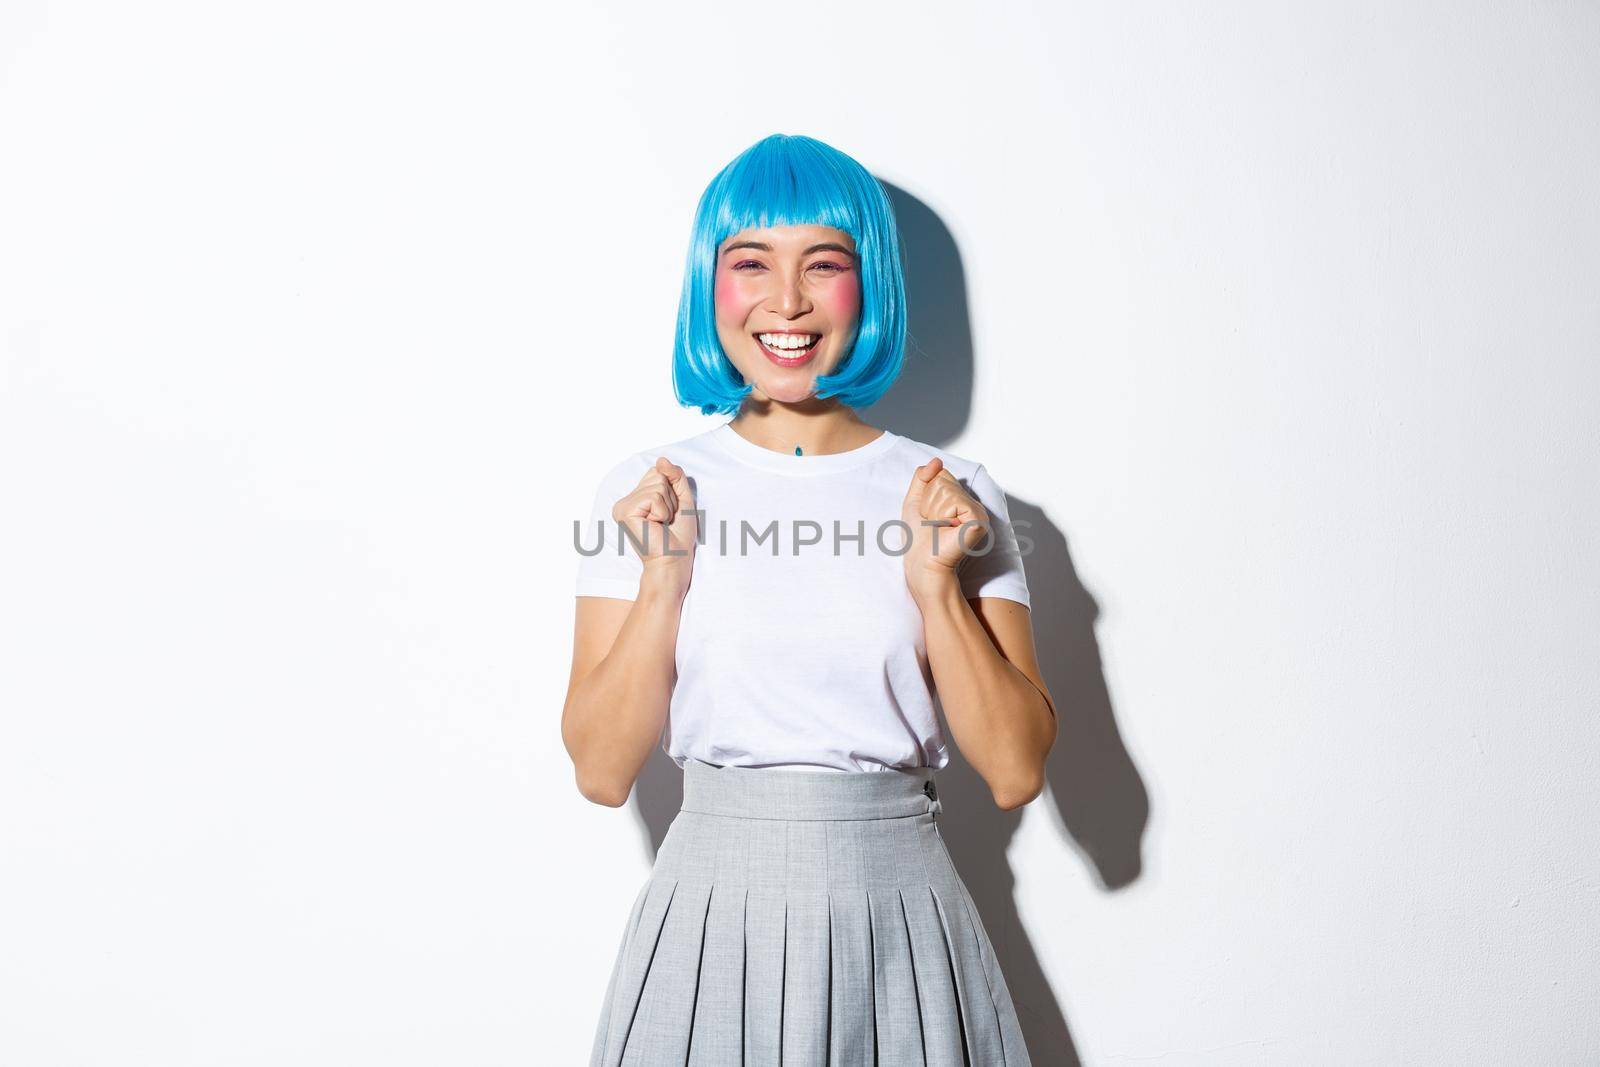 Image of cheerful asian girl feeling like winner, wearing blue wig, celebrating something, smiling and triumphing, standing over white background.